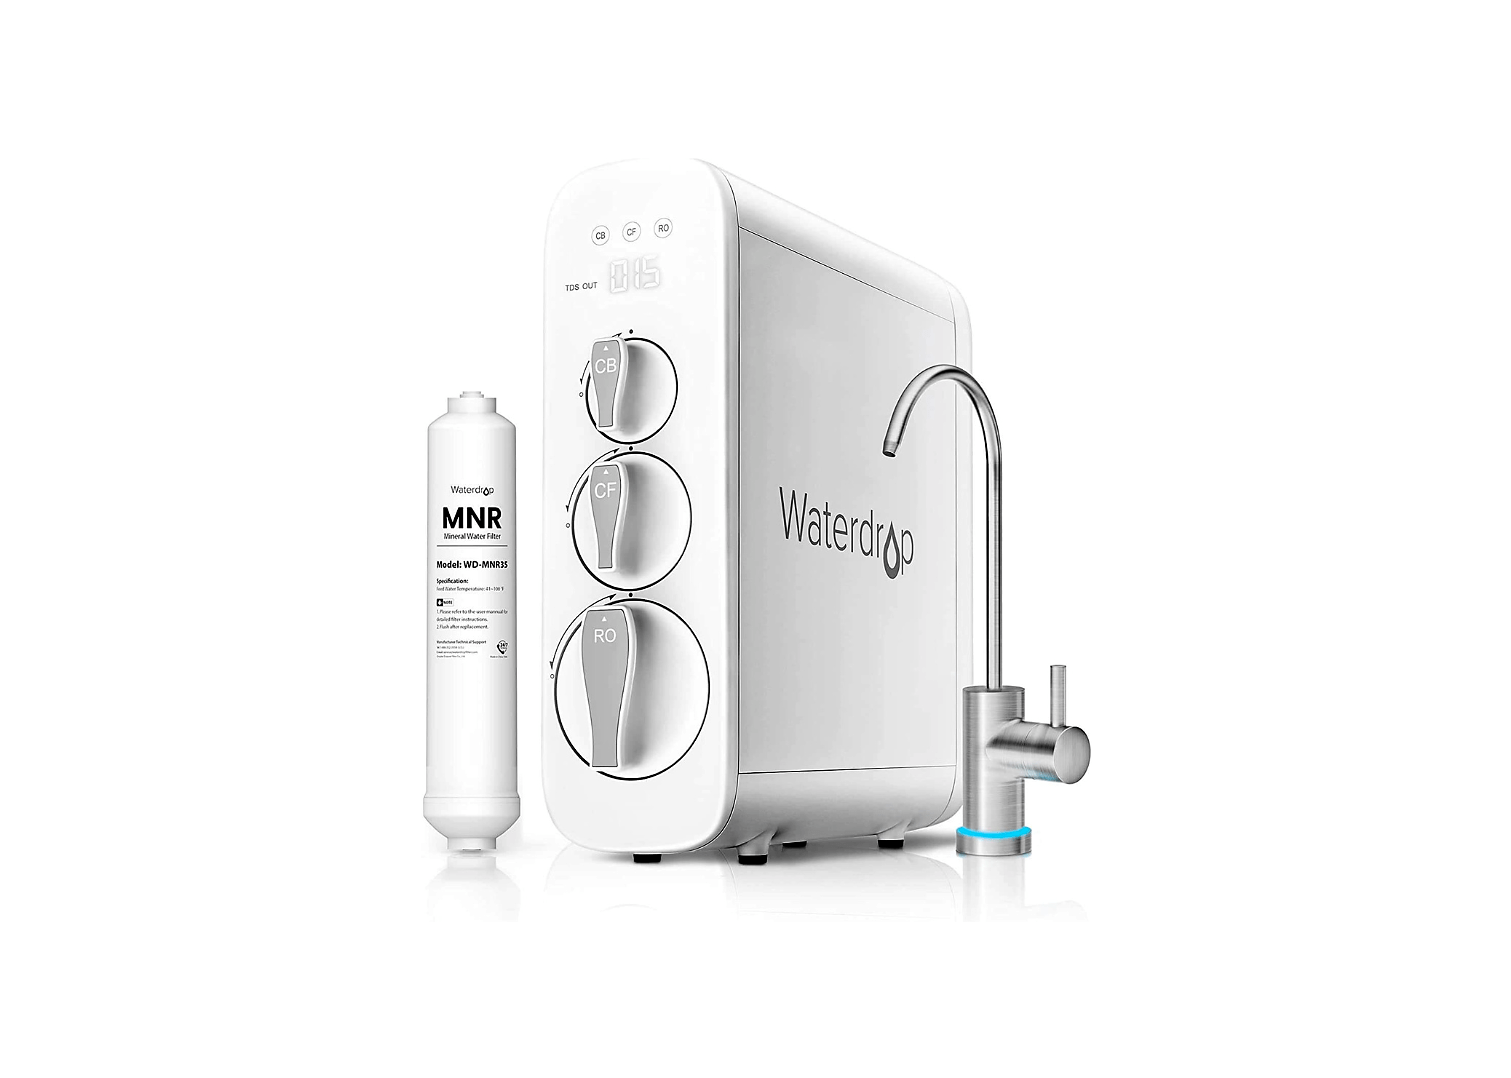 Waterdrop WD-17UB 17ub Under Sink Water Filter System, NSF/ANSI 42 Certified, with Dedicated Faucet, 19K Gallons High Chlorine Reduction Capacity